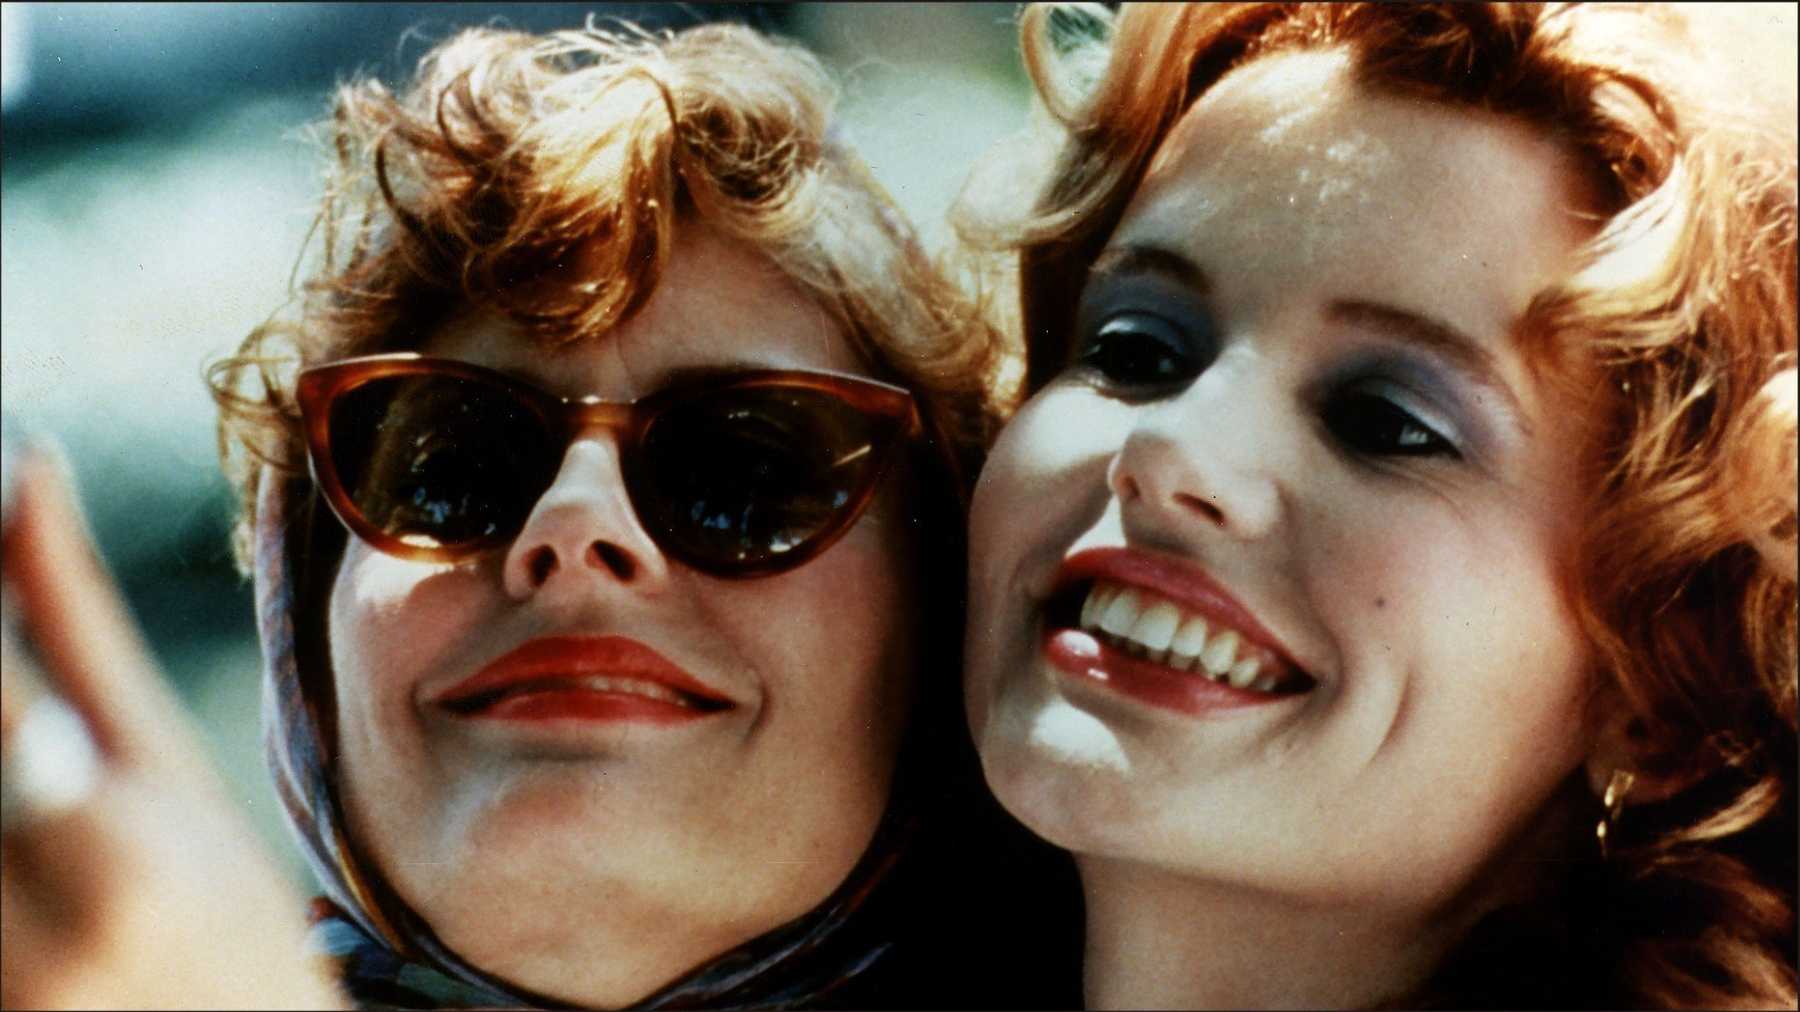 Thelma & Louise: 10 Behind-The-Scenes Facts About Ridley Scott's Movie